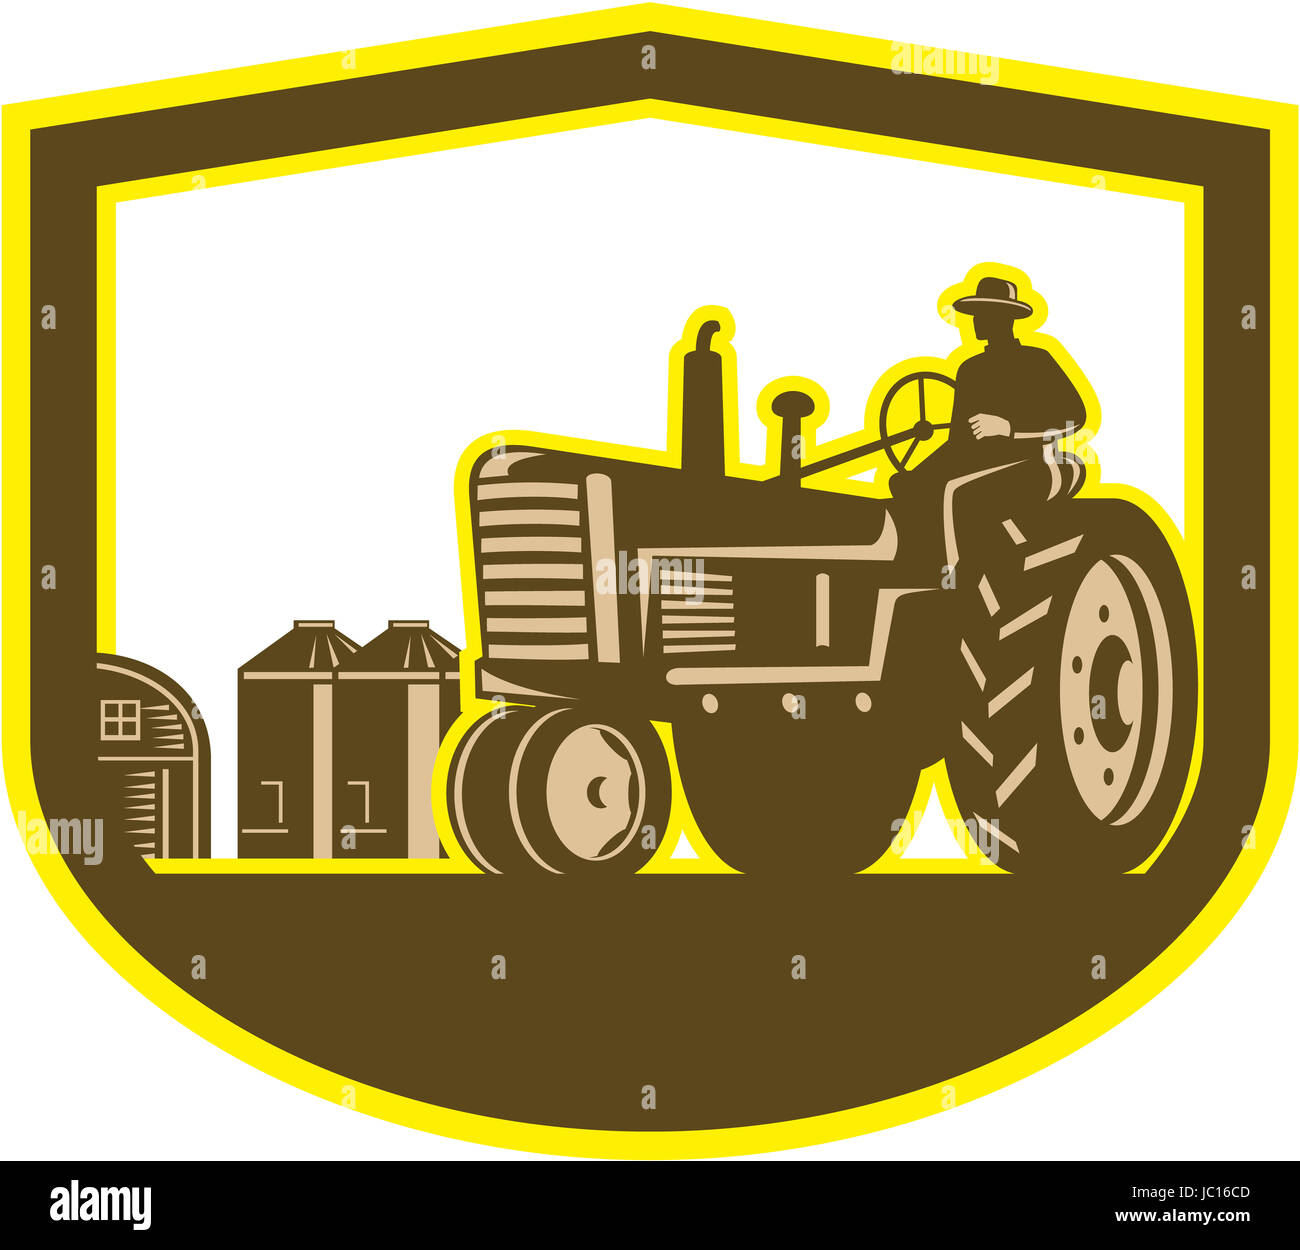 Illlustration of a farmer worker driving a vintage tractor plowing farm field set inside shield crest done in retro style on isolated background. Stock Photo